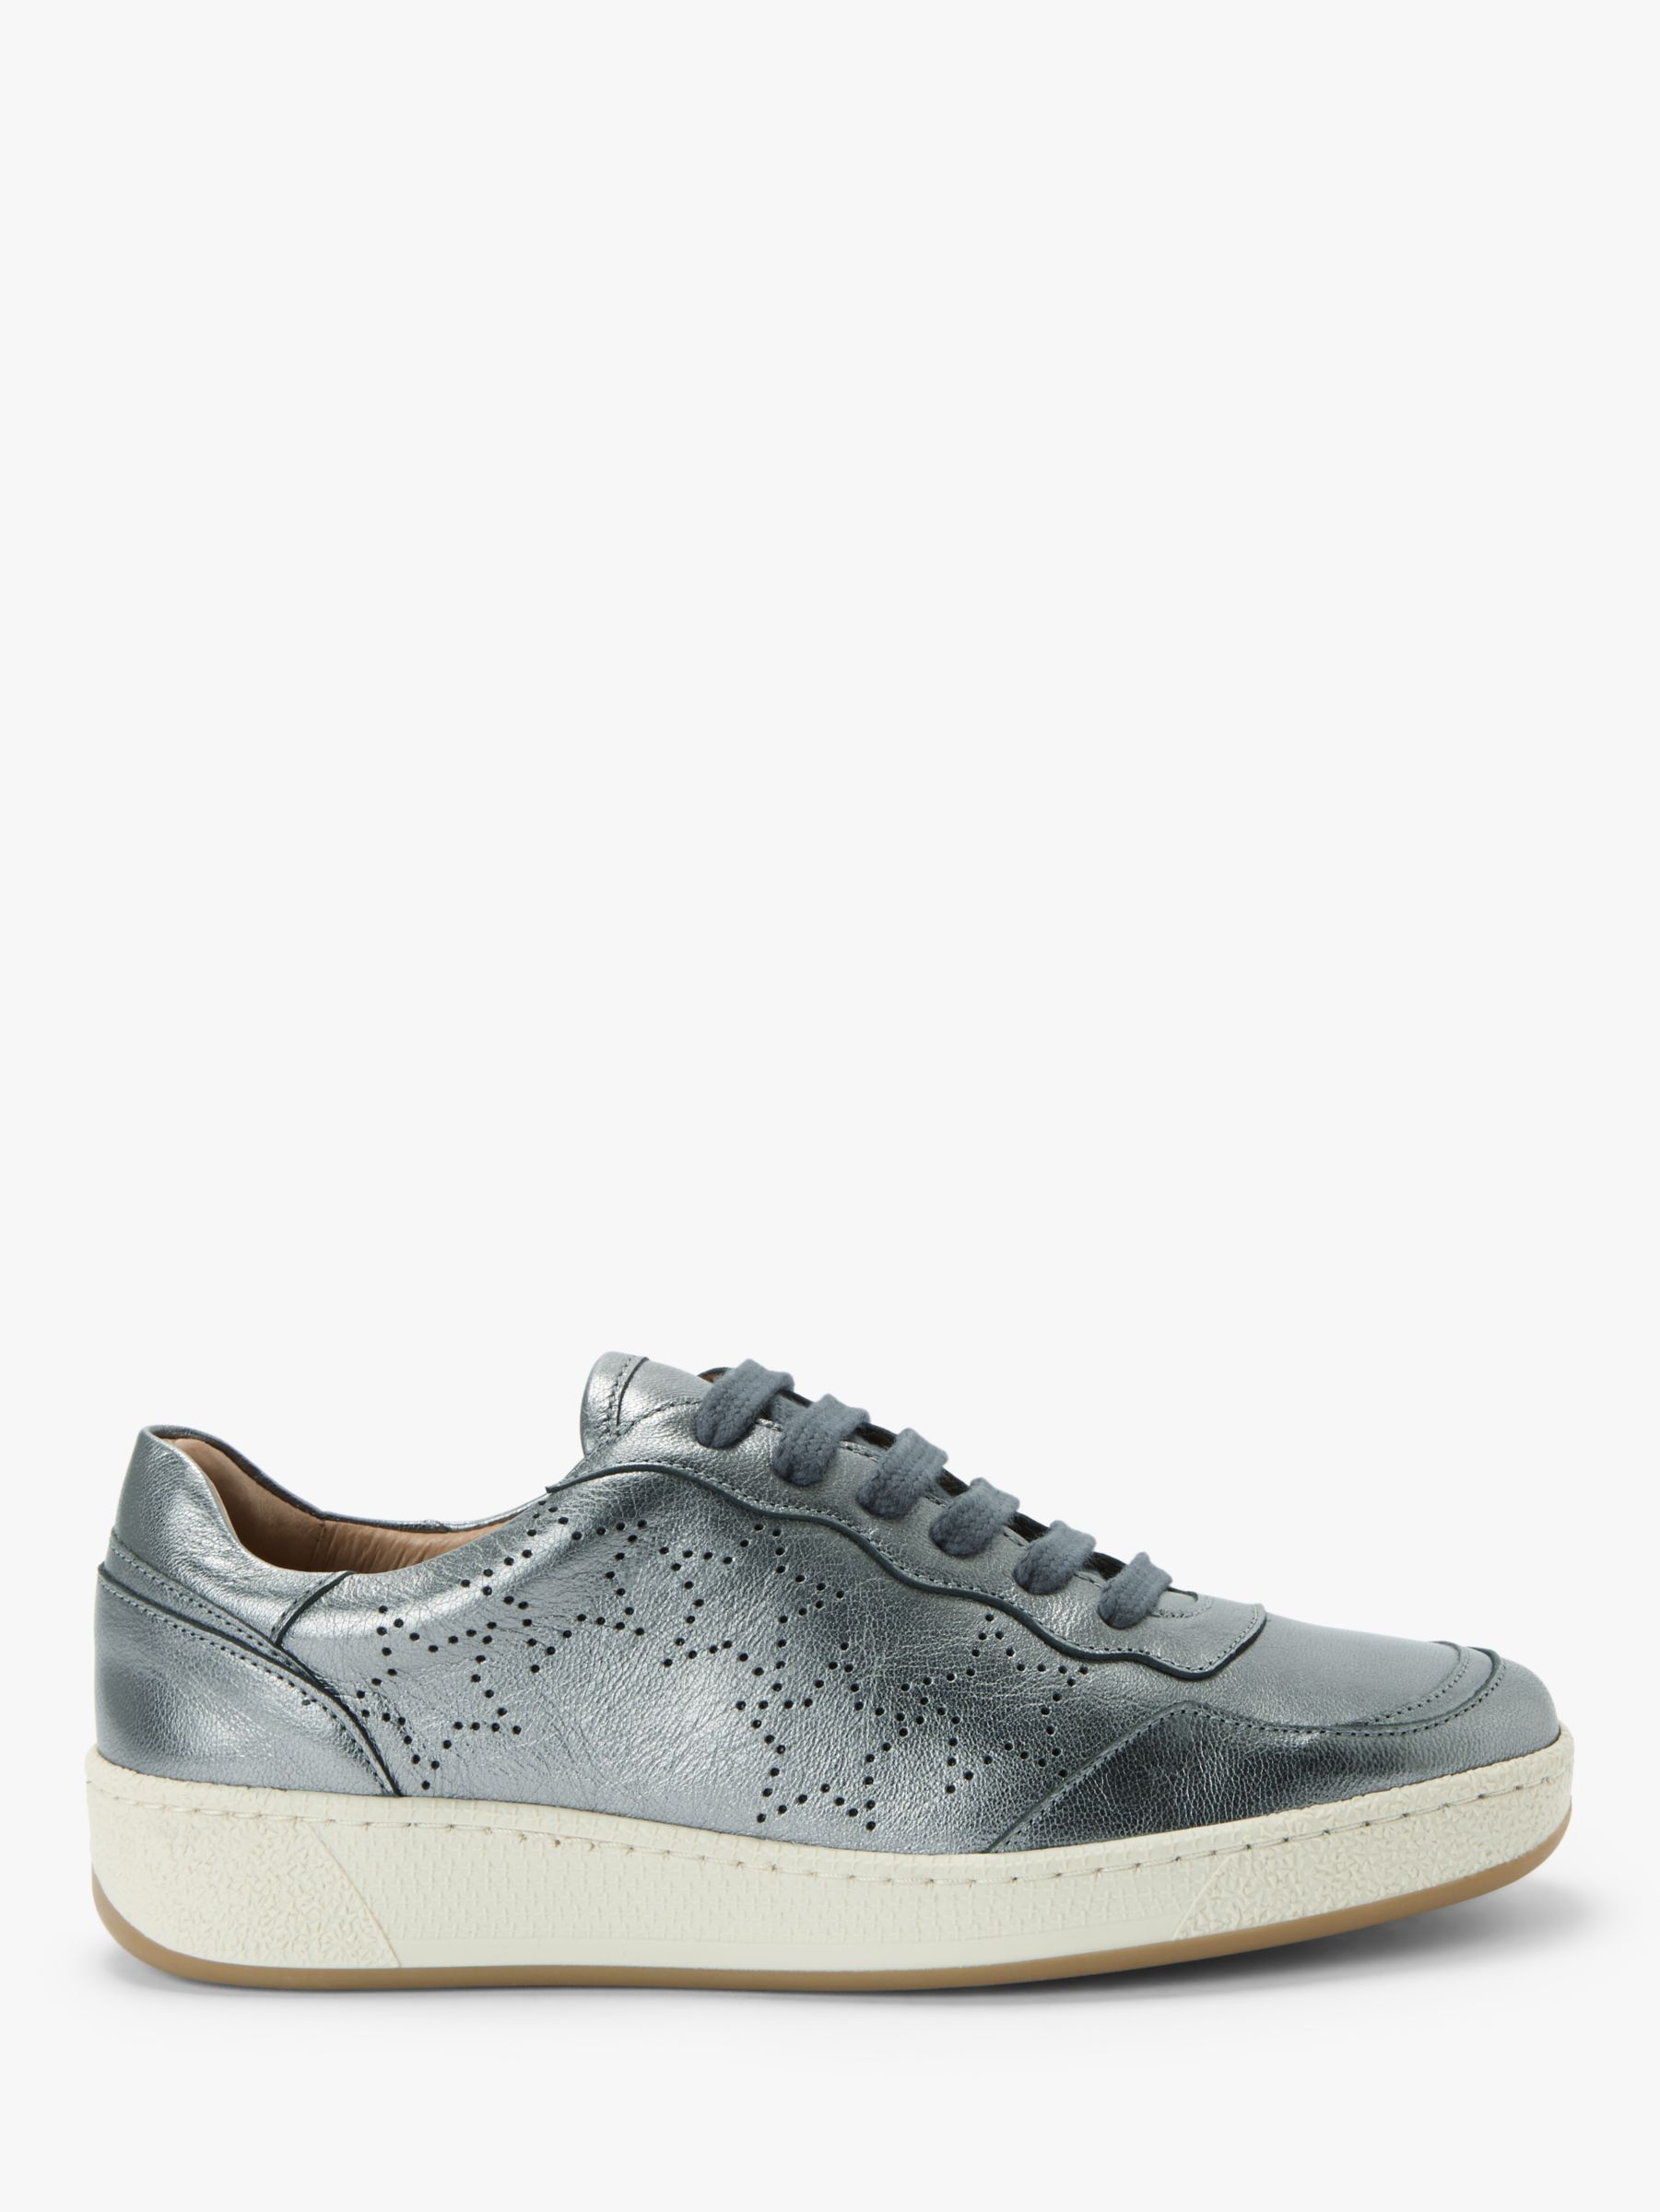 AND/OR Evalina Leather Trainers, Silver